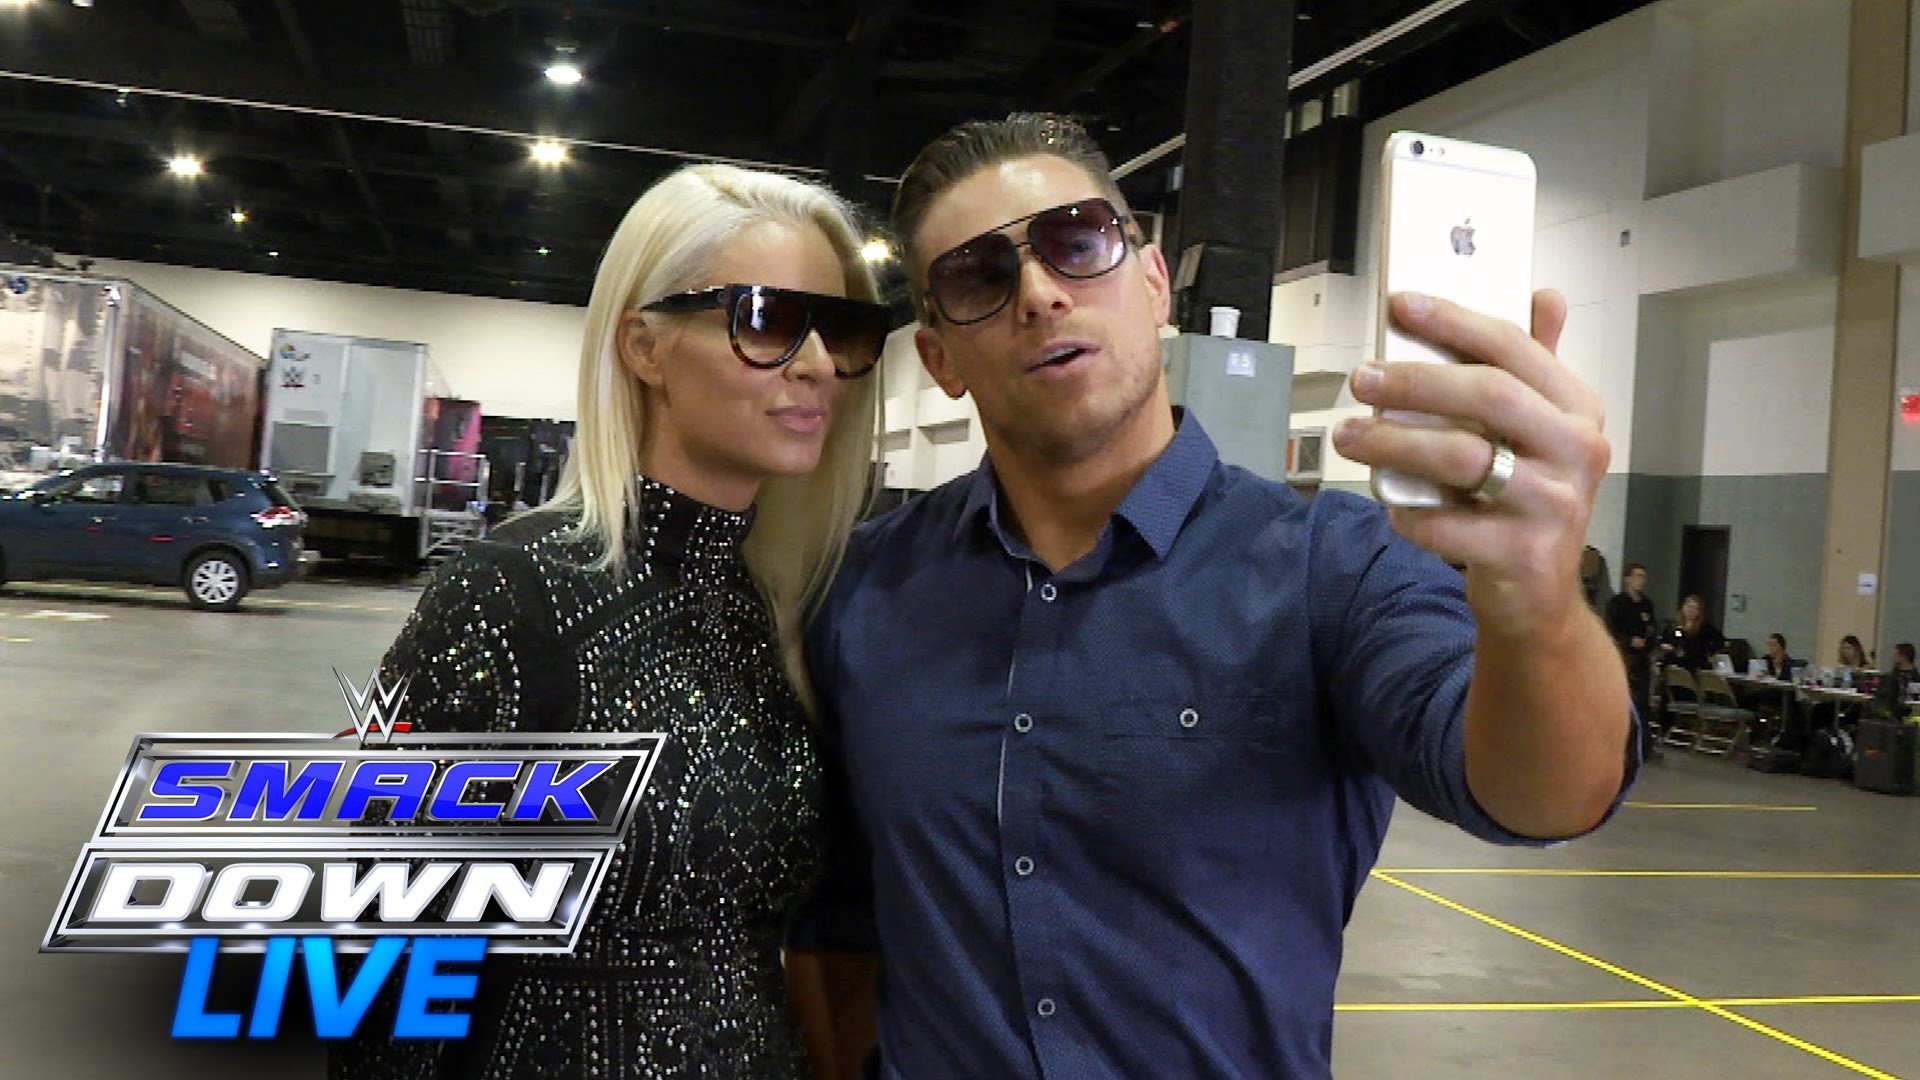 1920x1080 The Miz & Maryse Facebook Live as they arrive for the WWE Draft: July 19,  2016 - YouTube